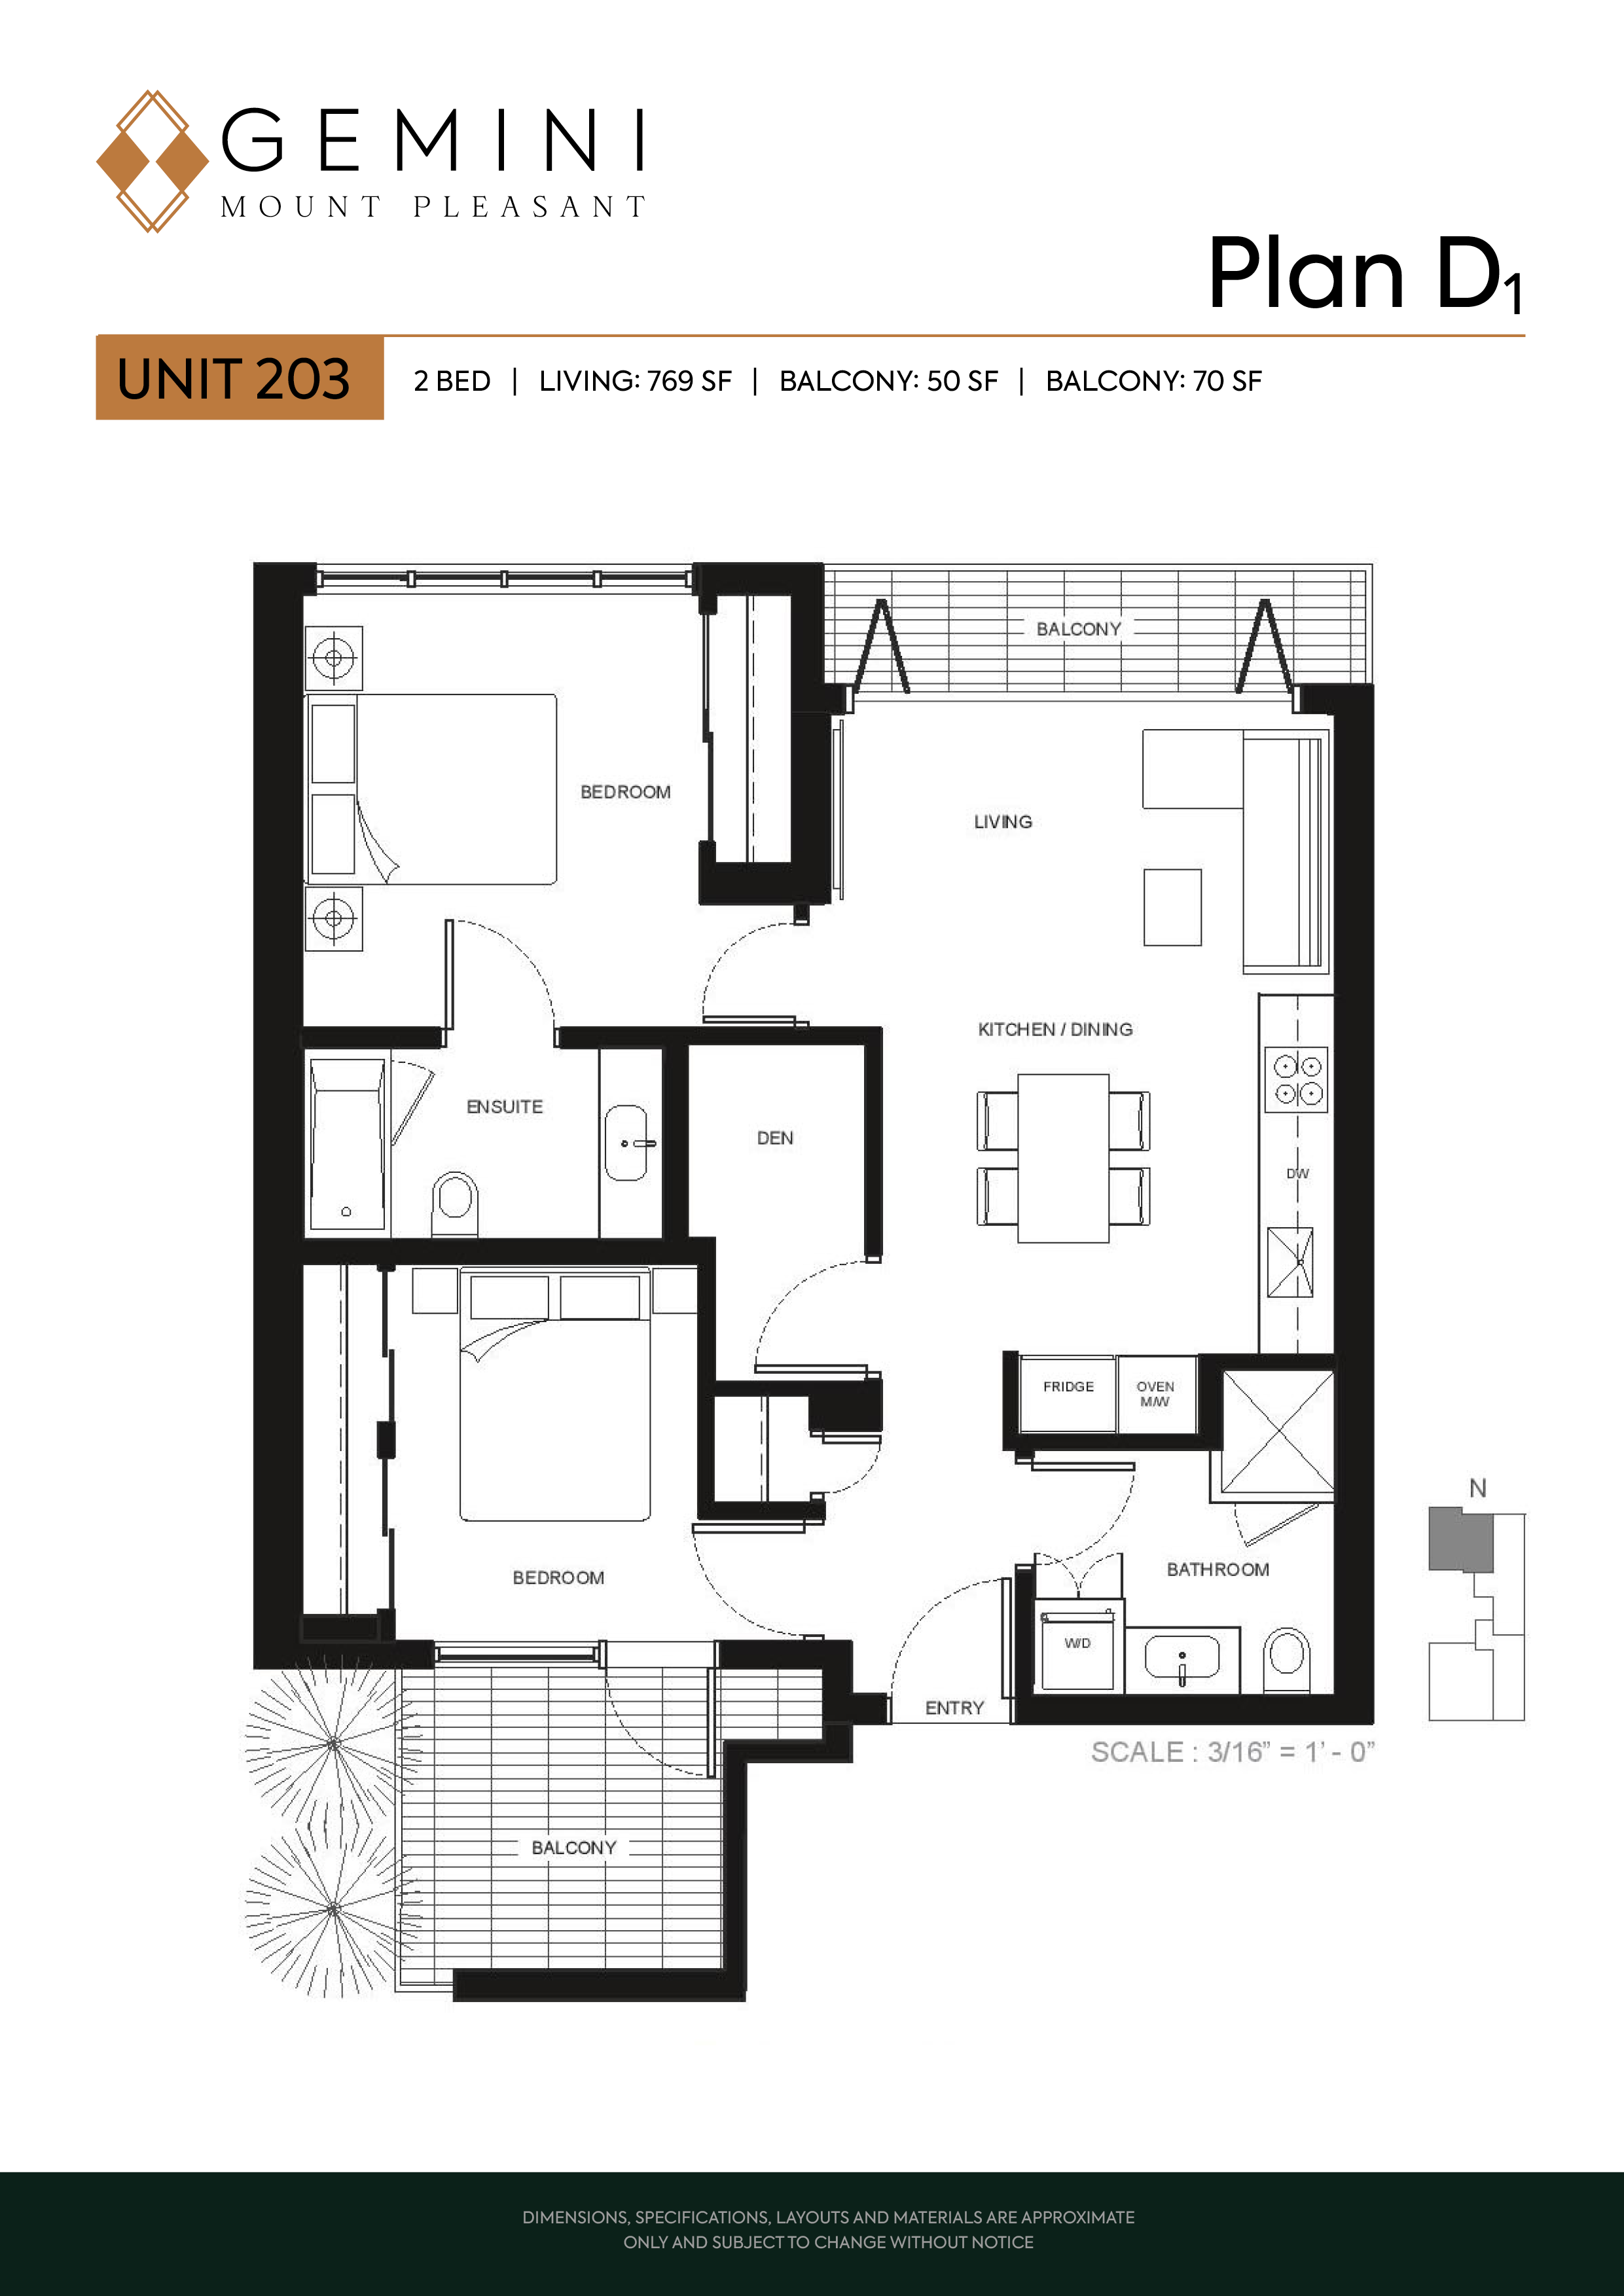 Plan D1 Floor Plan of Gemini Mount Pleasant Condos with undefined beds